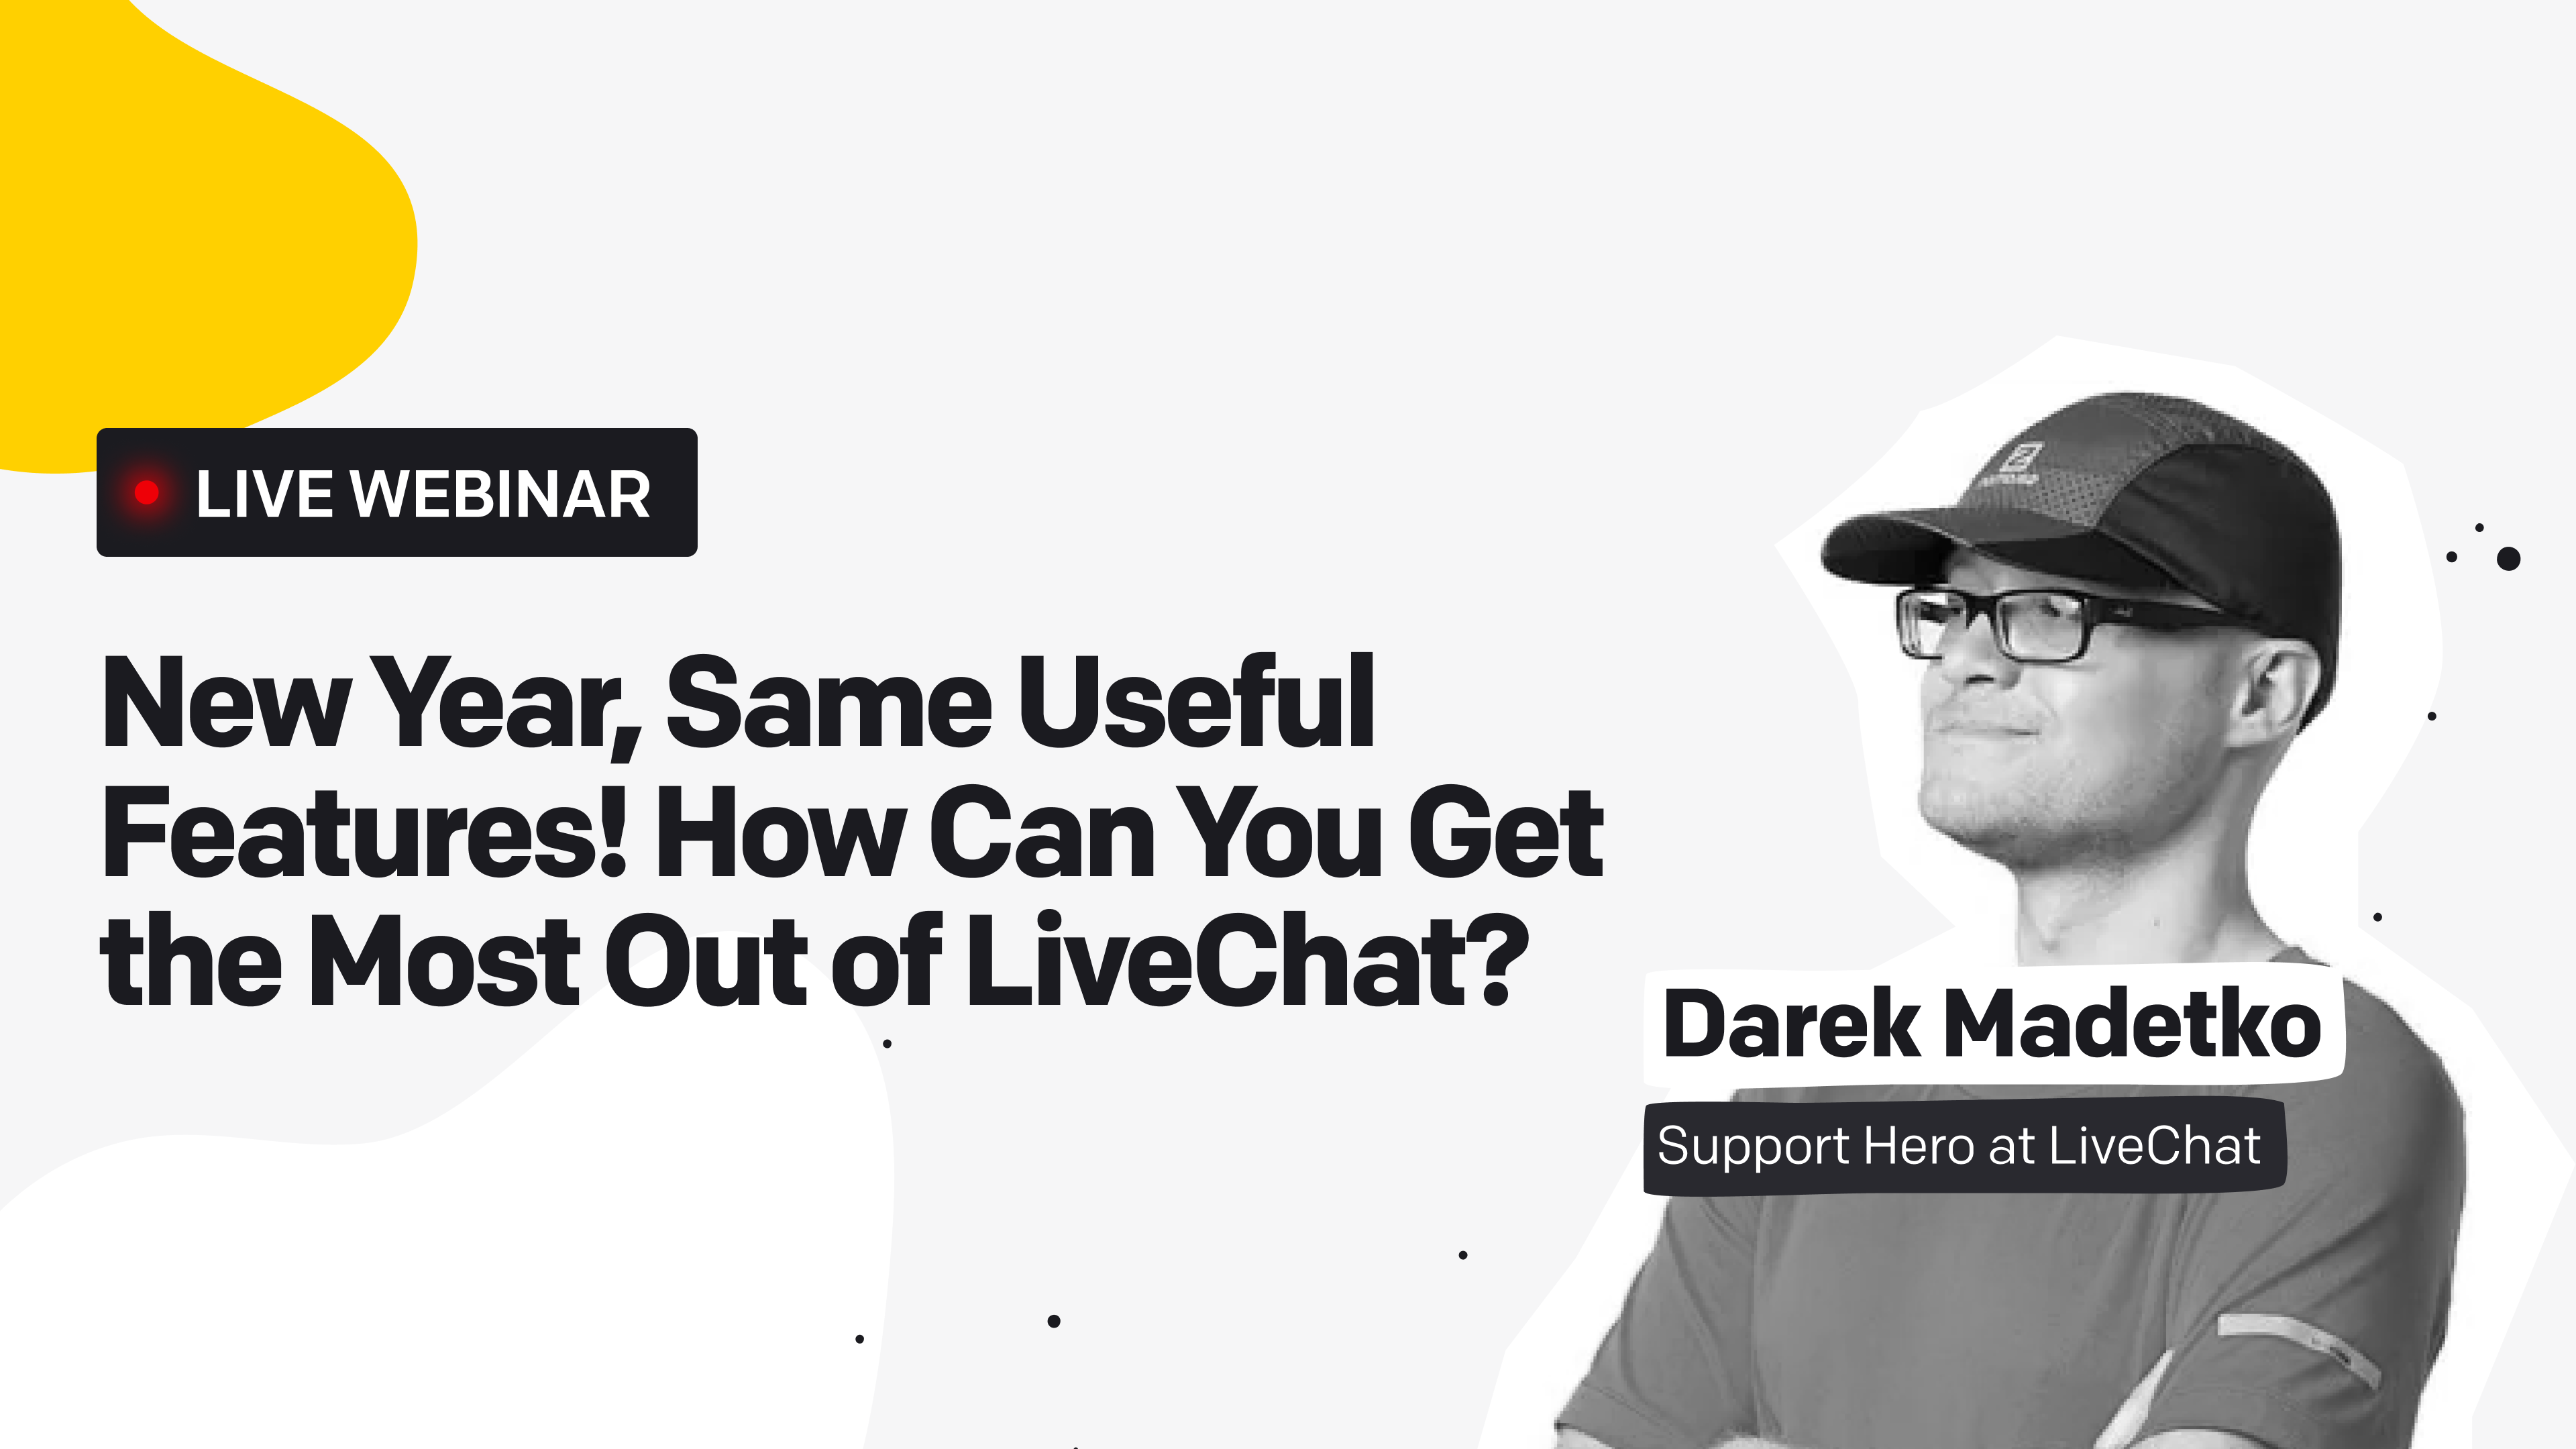 New Year Same Useful Features! Get the Most Out of LiveChat!